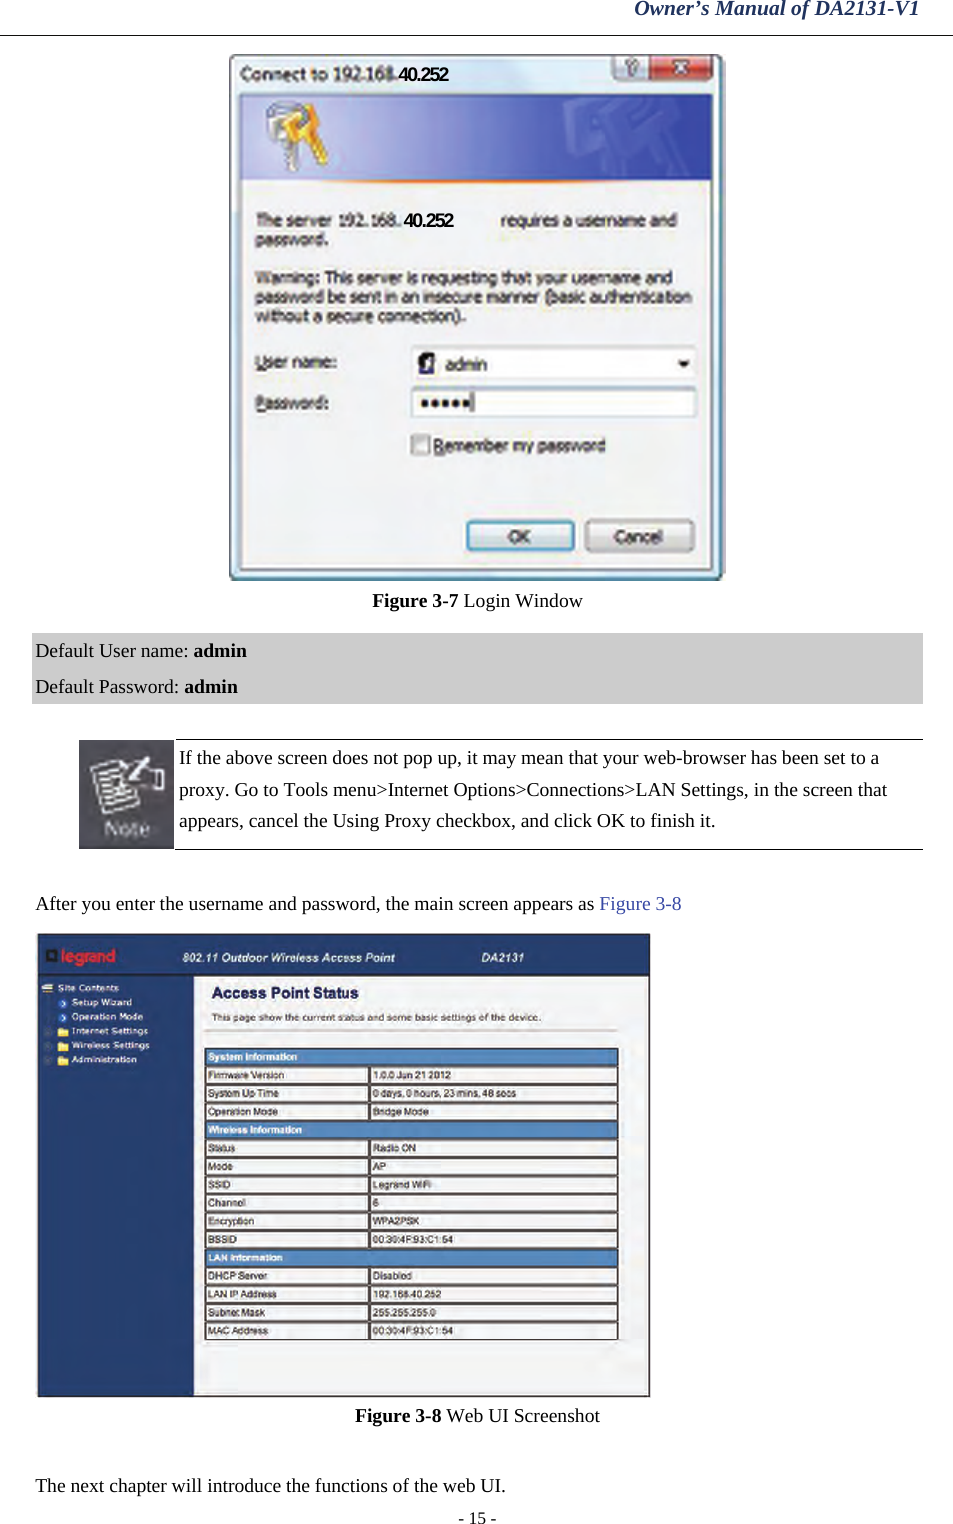 Owner’s Manual of DA2131-V1 - 15 -  Figure 3-7 Login Window  Default User name: admin Default Password: admin   If the above screen does not pop up, it may mean that your web-browser has been set to a proxy. Go to Tools menu&gt;Internet Options&gt;Connections&gt;LAN Settings, in the screen that appears, cancel the Using Proxy checkbox, and click OK to finish it.  After you enter the username and password, the main screen appears as Figure 3-8  Figure 3-8 Web UI Screenshot  The next chapter will introduce the functions of the web UI. 40.252 40.252 